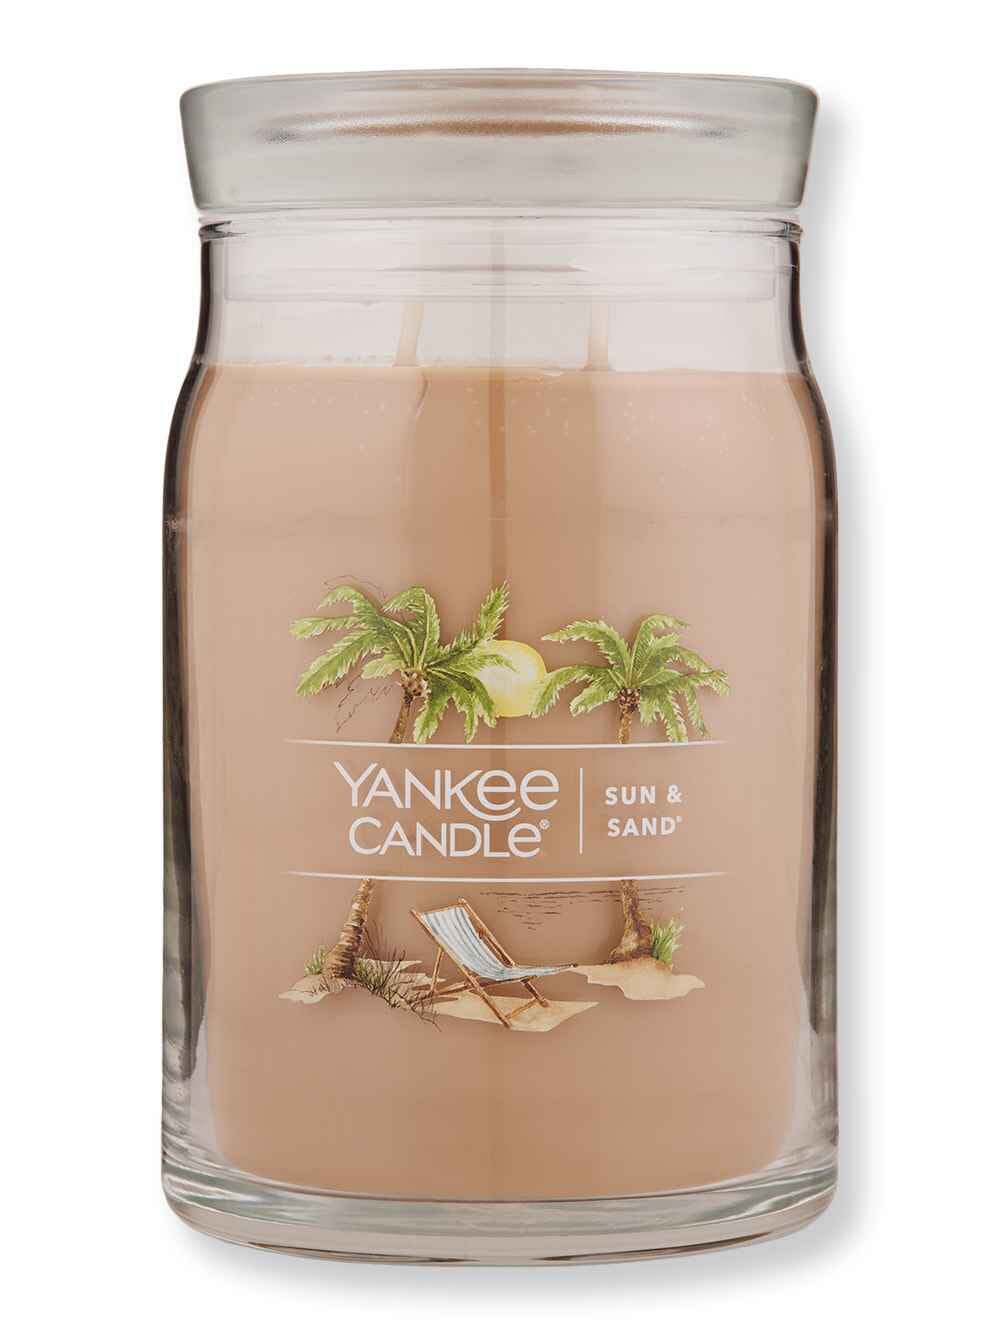 Yankee Candle Yankee Candle Sun & Sand Signature Large Jar Candle 20 oz Candles & Diffusers 